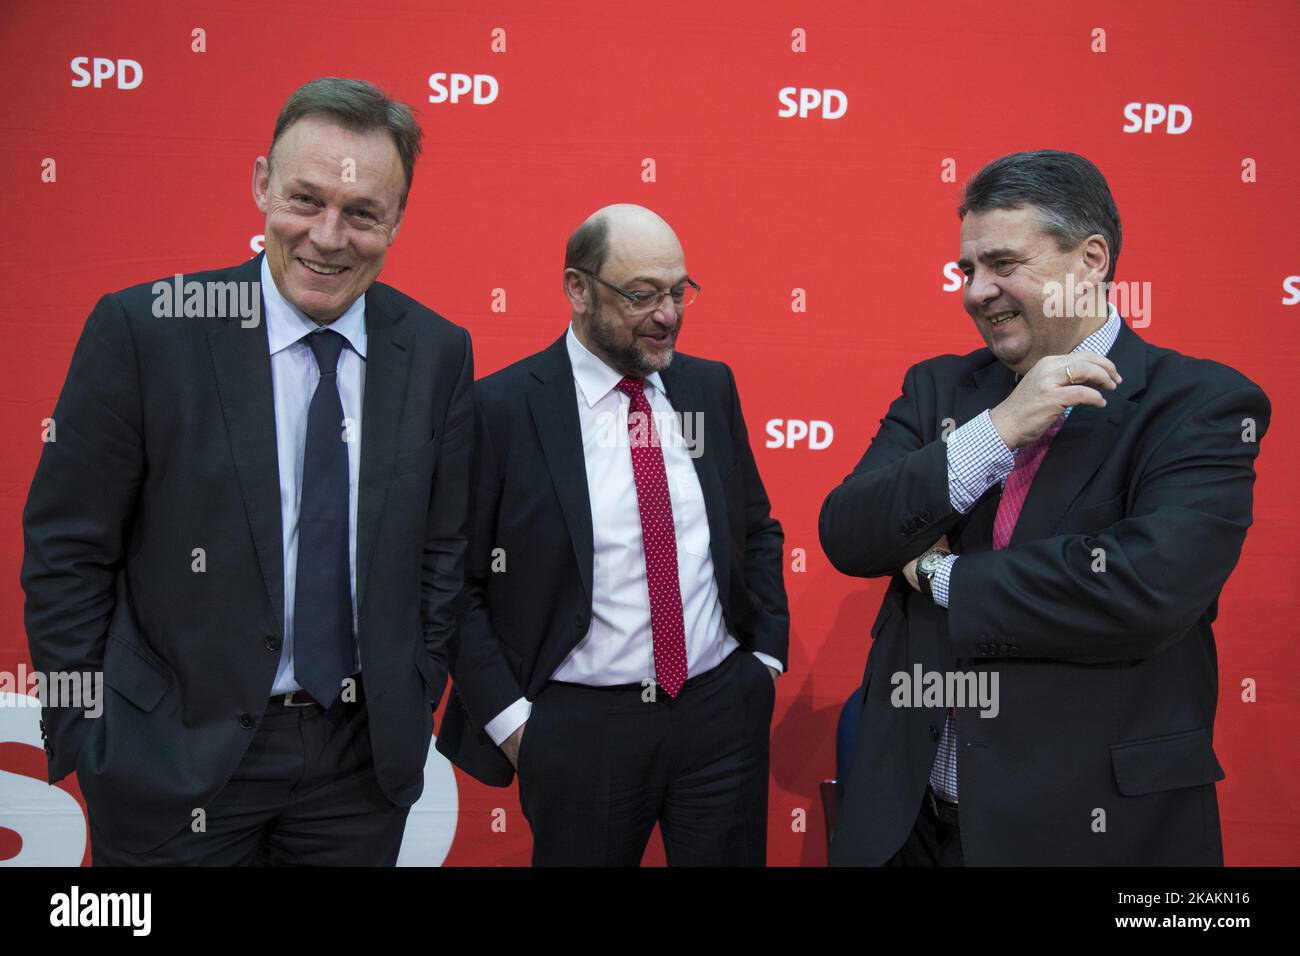 Chancellor candidate of the German Social Democratic party (SPD) Martin Schulz (C), German Foreign Minister Sigmar Gabriel (R) and chairman of the Bundestag SPD faction Thomas Oppermann (L) chat prior to a Party Board meeting at the SPD headquarters in Willy-Brandt-Haus in Berlin, Germany on February 13, 2017. (Photo by Emmanuele Contini/NurPhoto) *** Please Use Credit from Credit Field *** Stock Photo